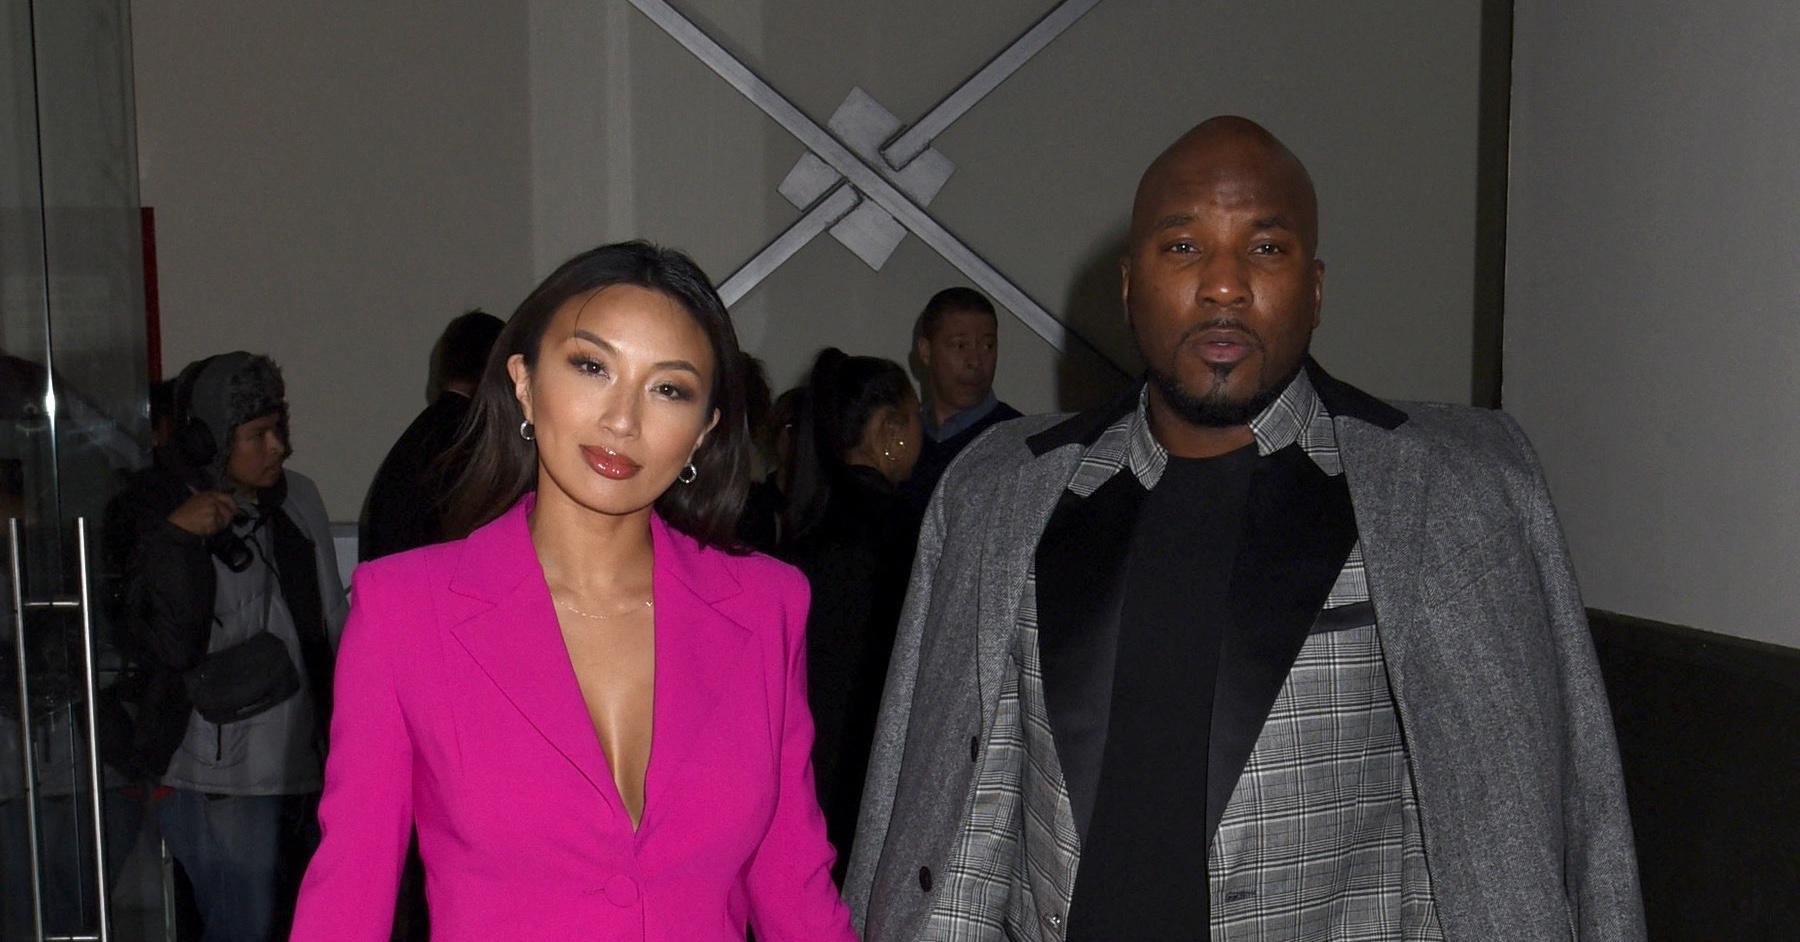 Jeezy Files For Divorce From Jeannie Mai After 2 Years Of Marriage pic